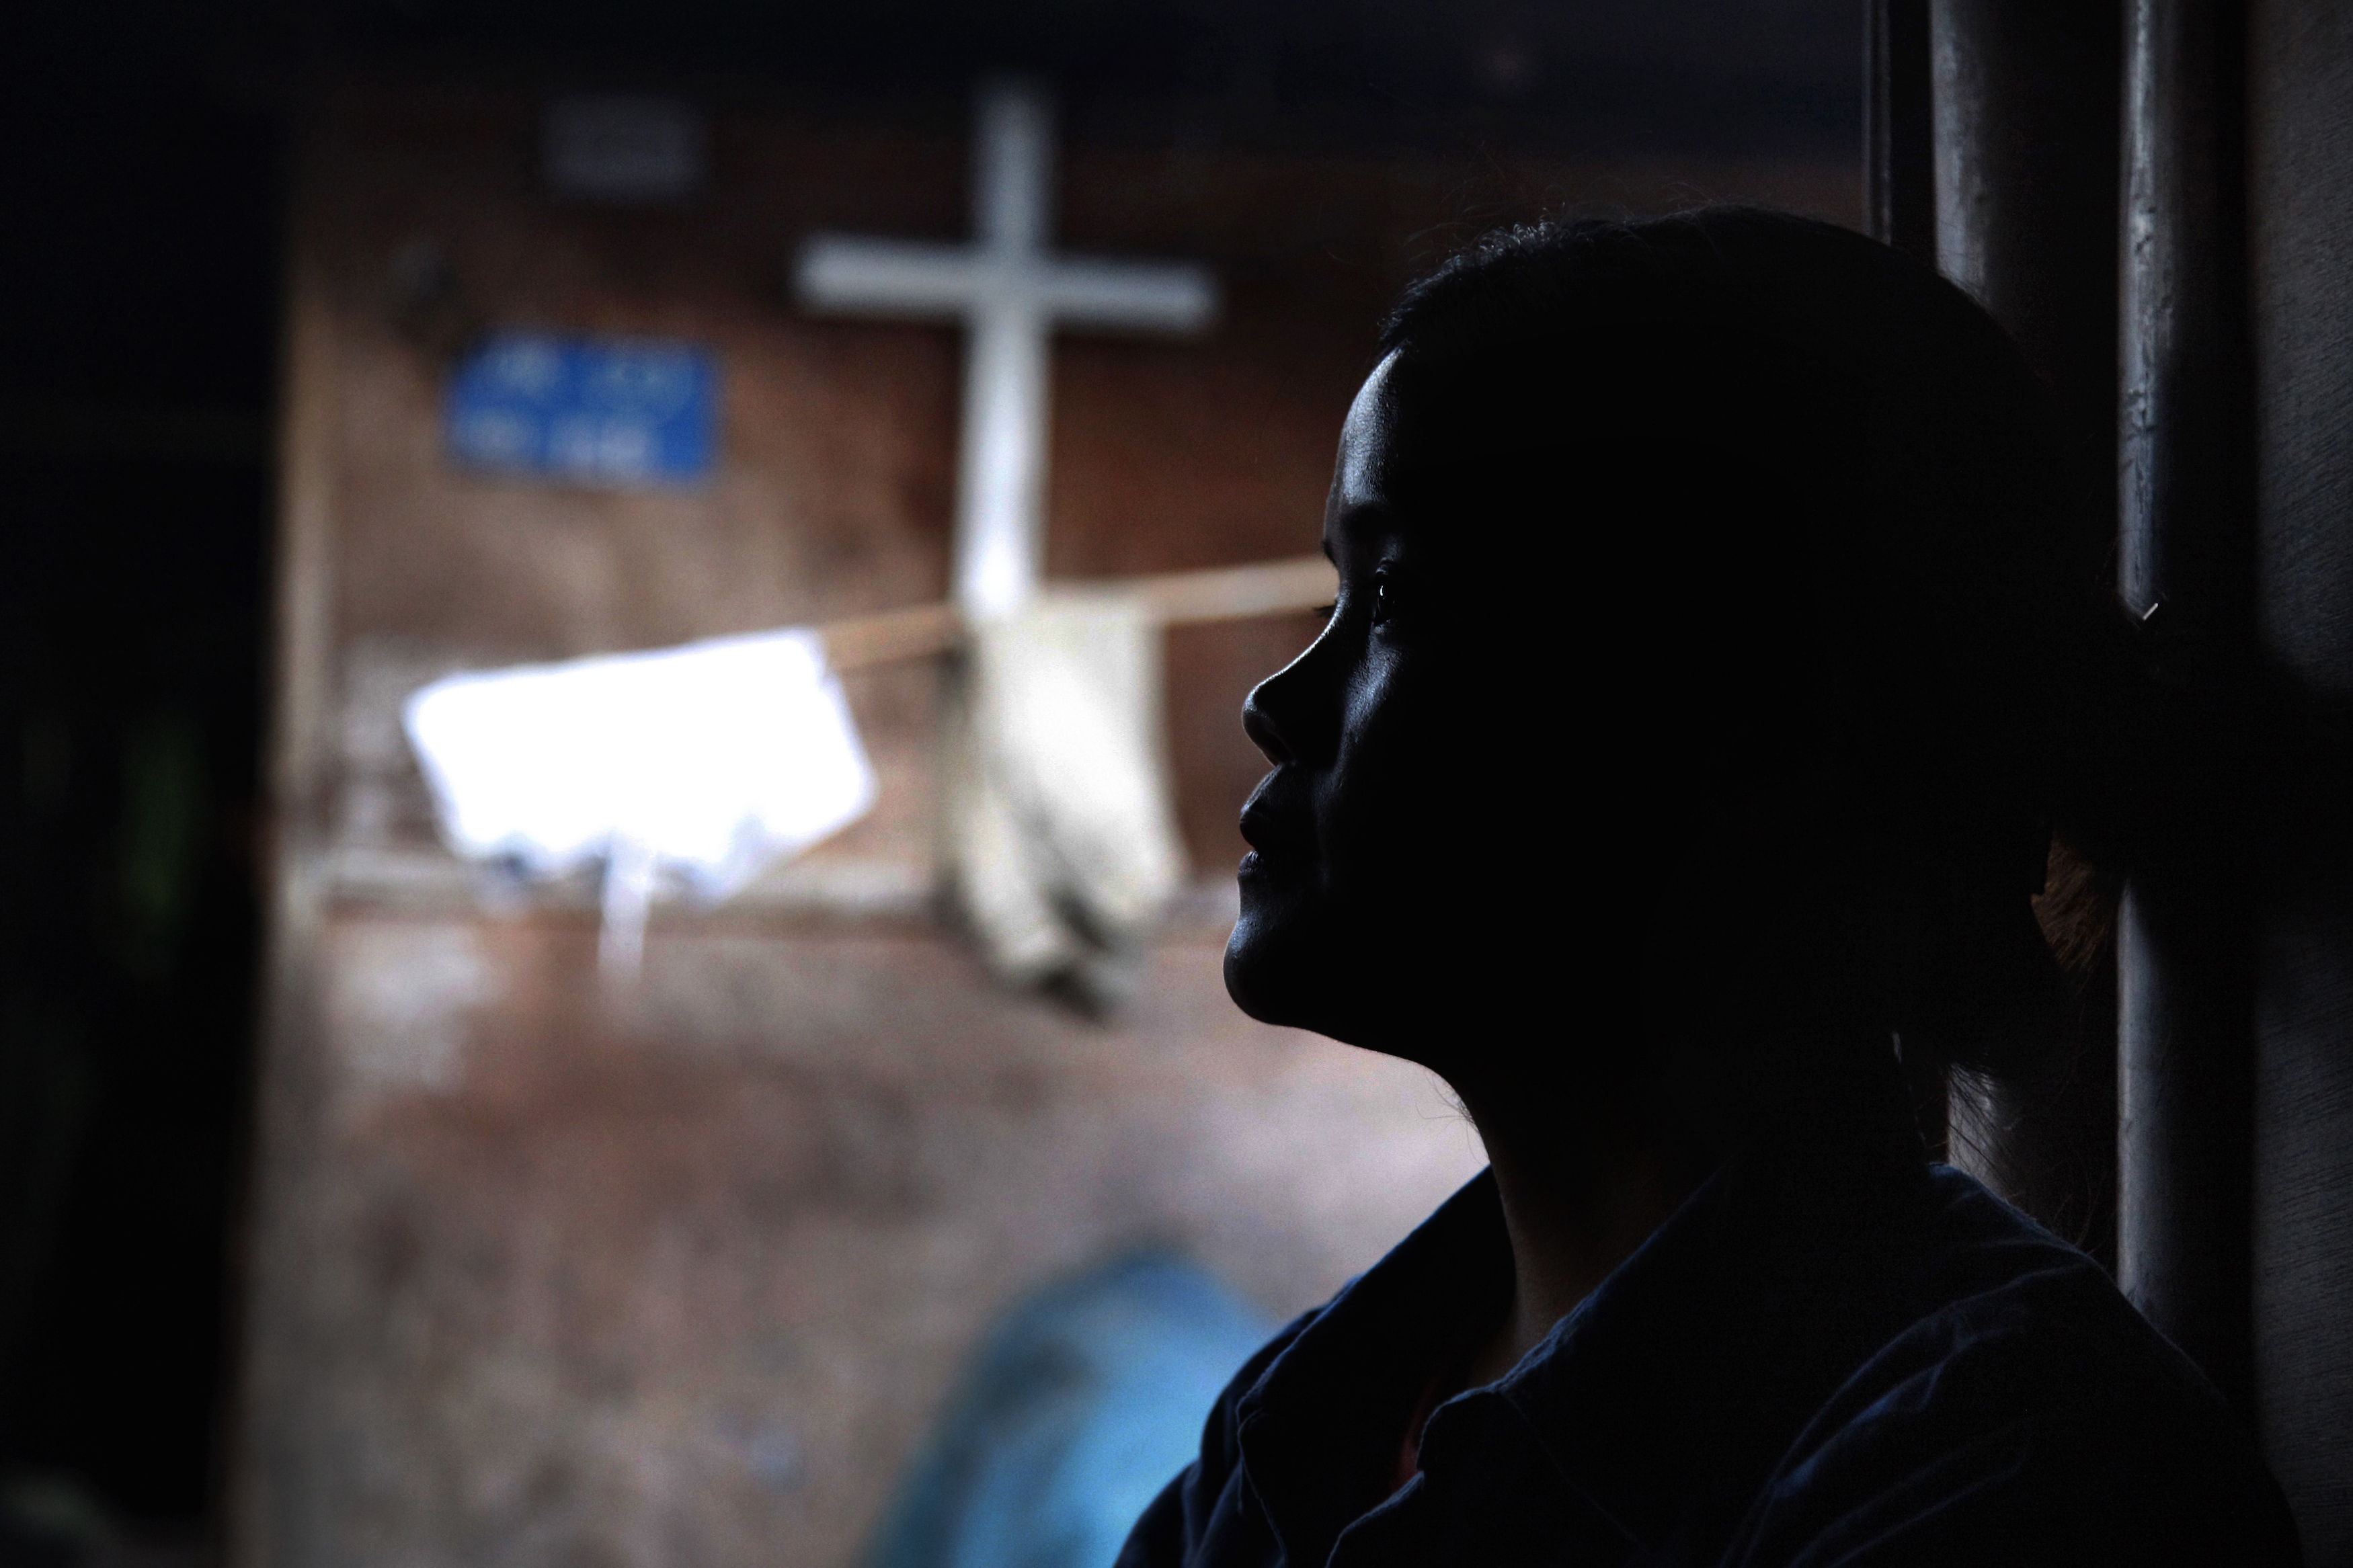 How Rural China Forms an Accomplice Network to Control Trafficked Females